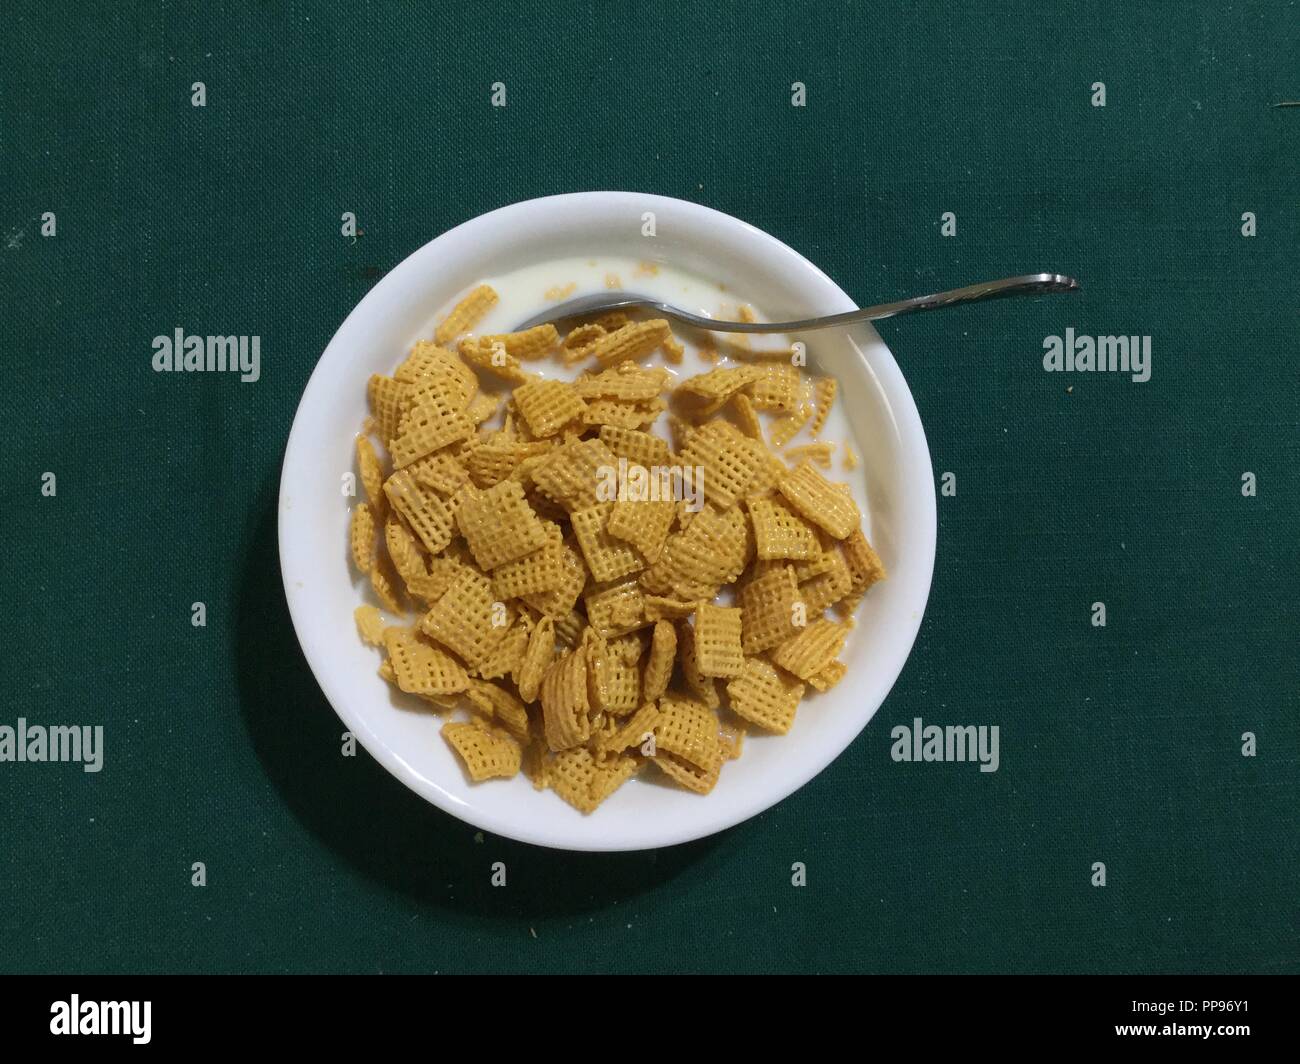 Bowel of square cereal in milk with spoon on green background. Stock Photo